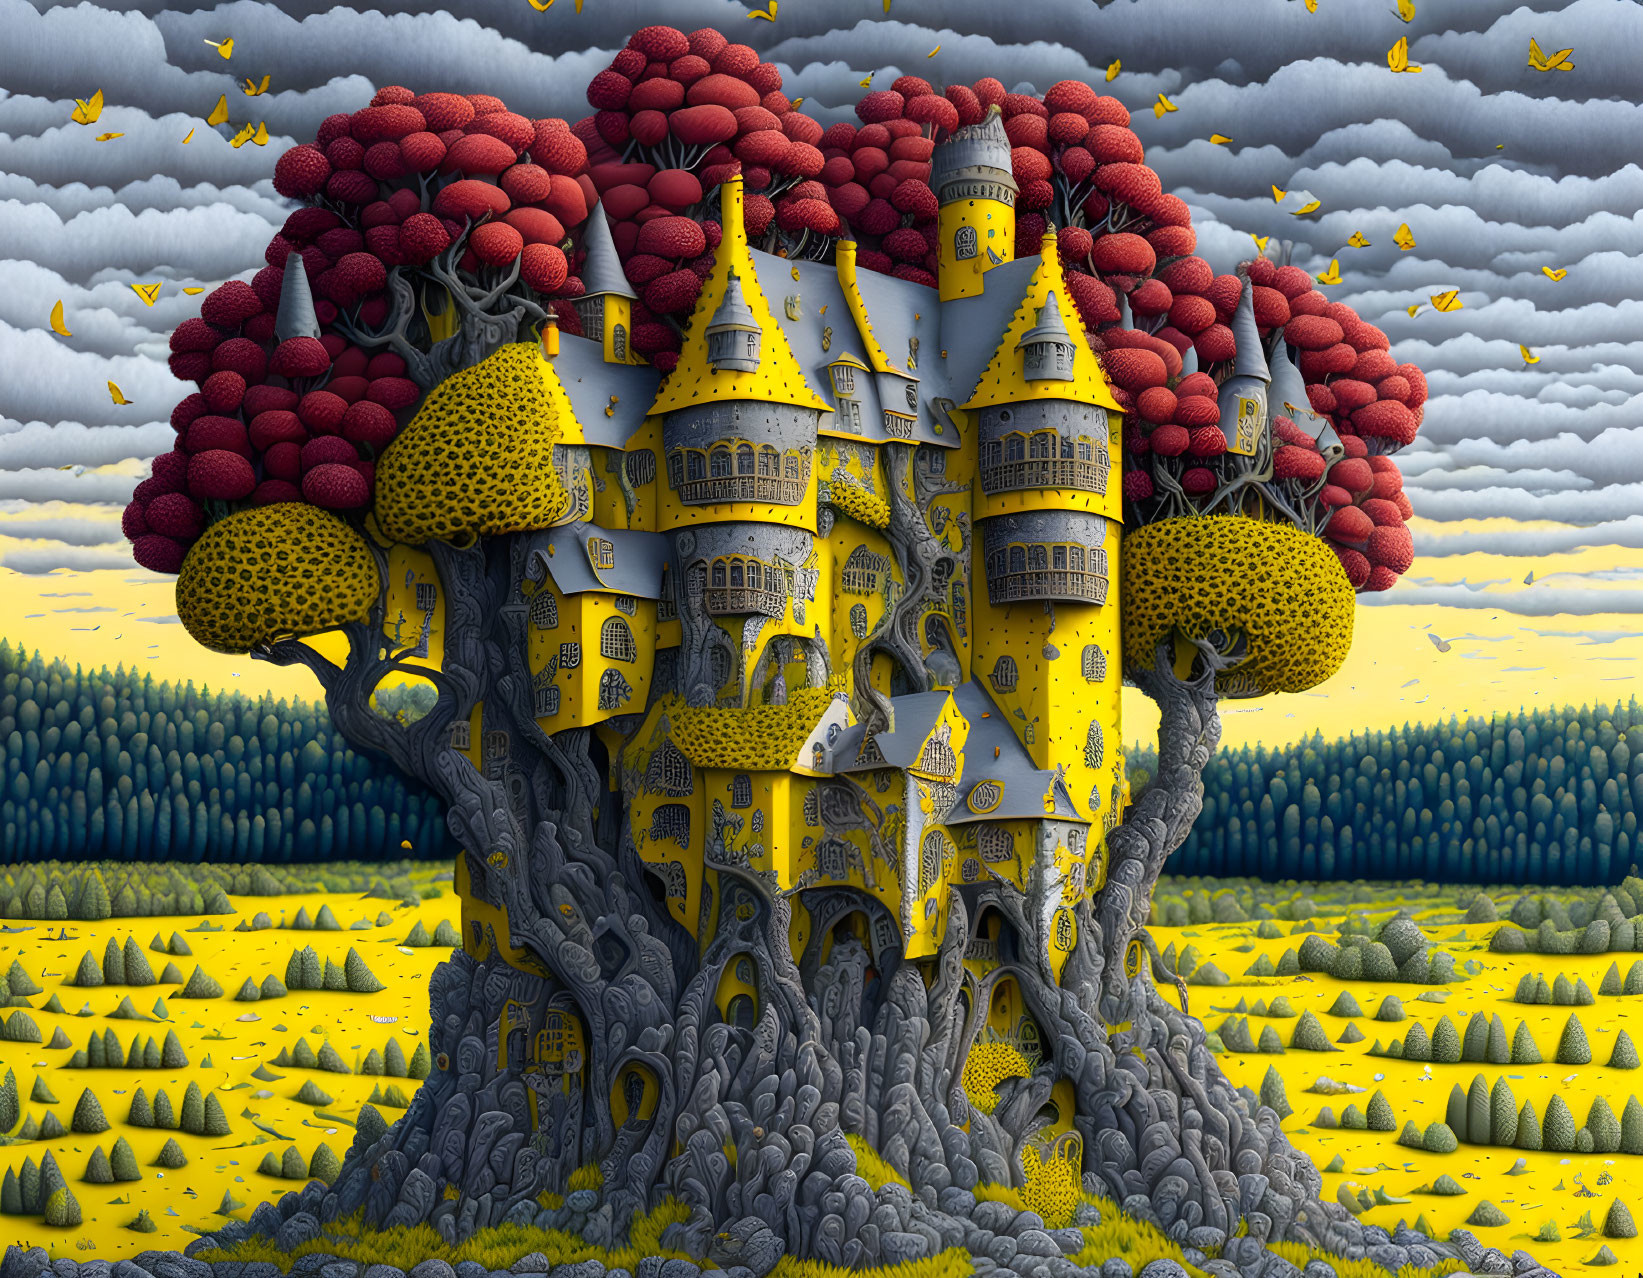 Surreal landscape with large yellow castle in tree, forest, cloudy sky